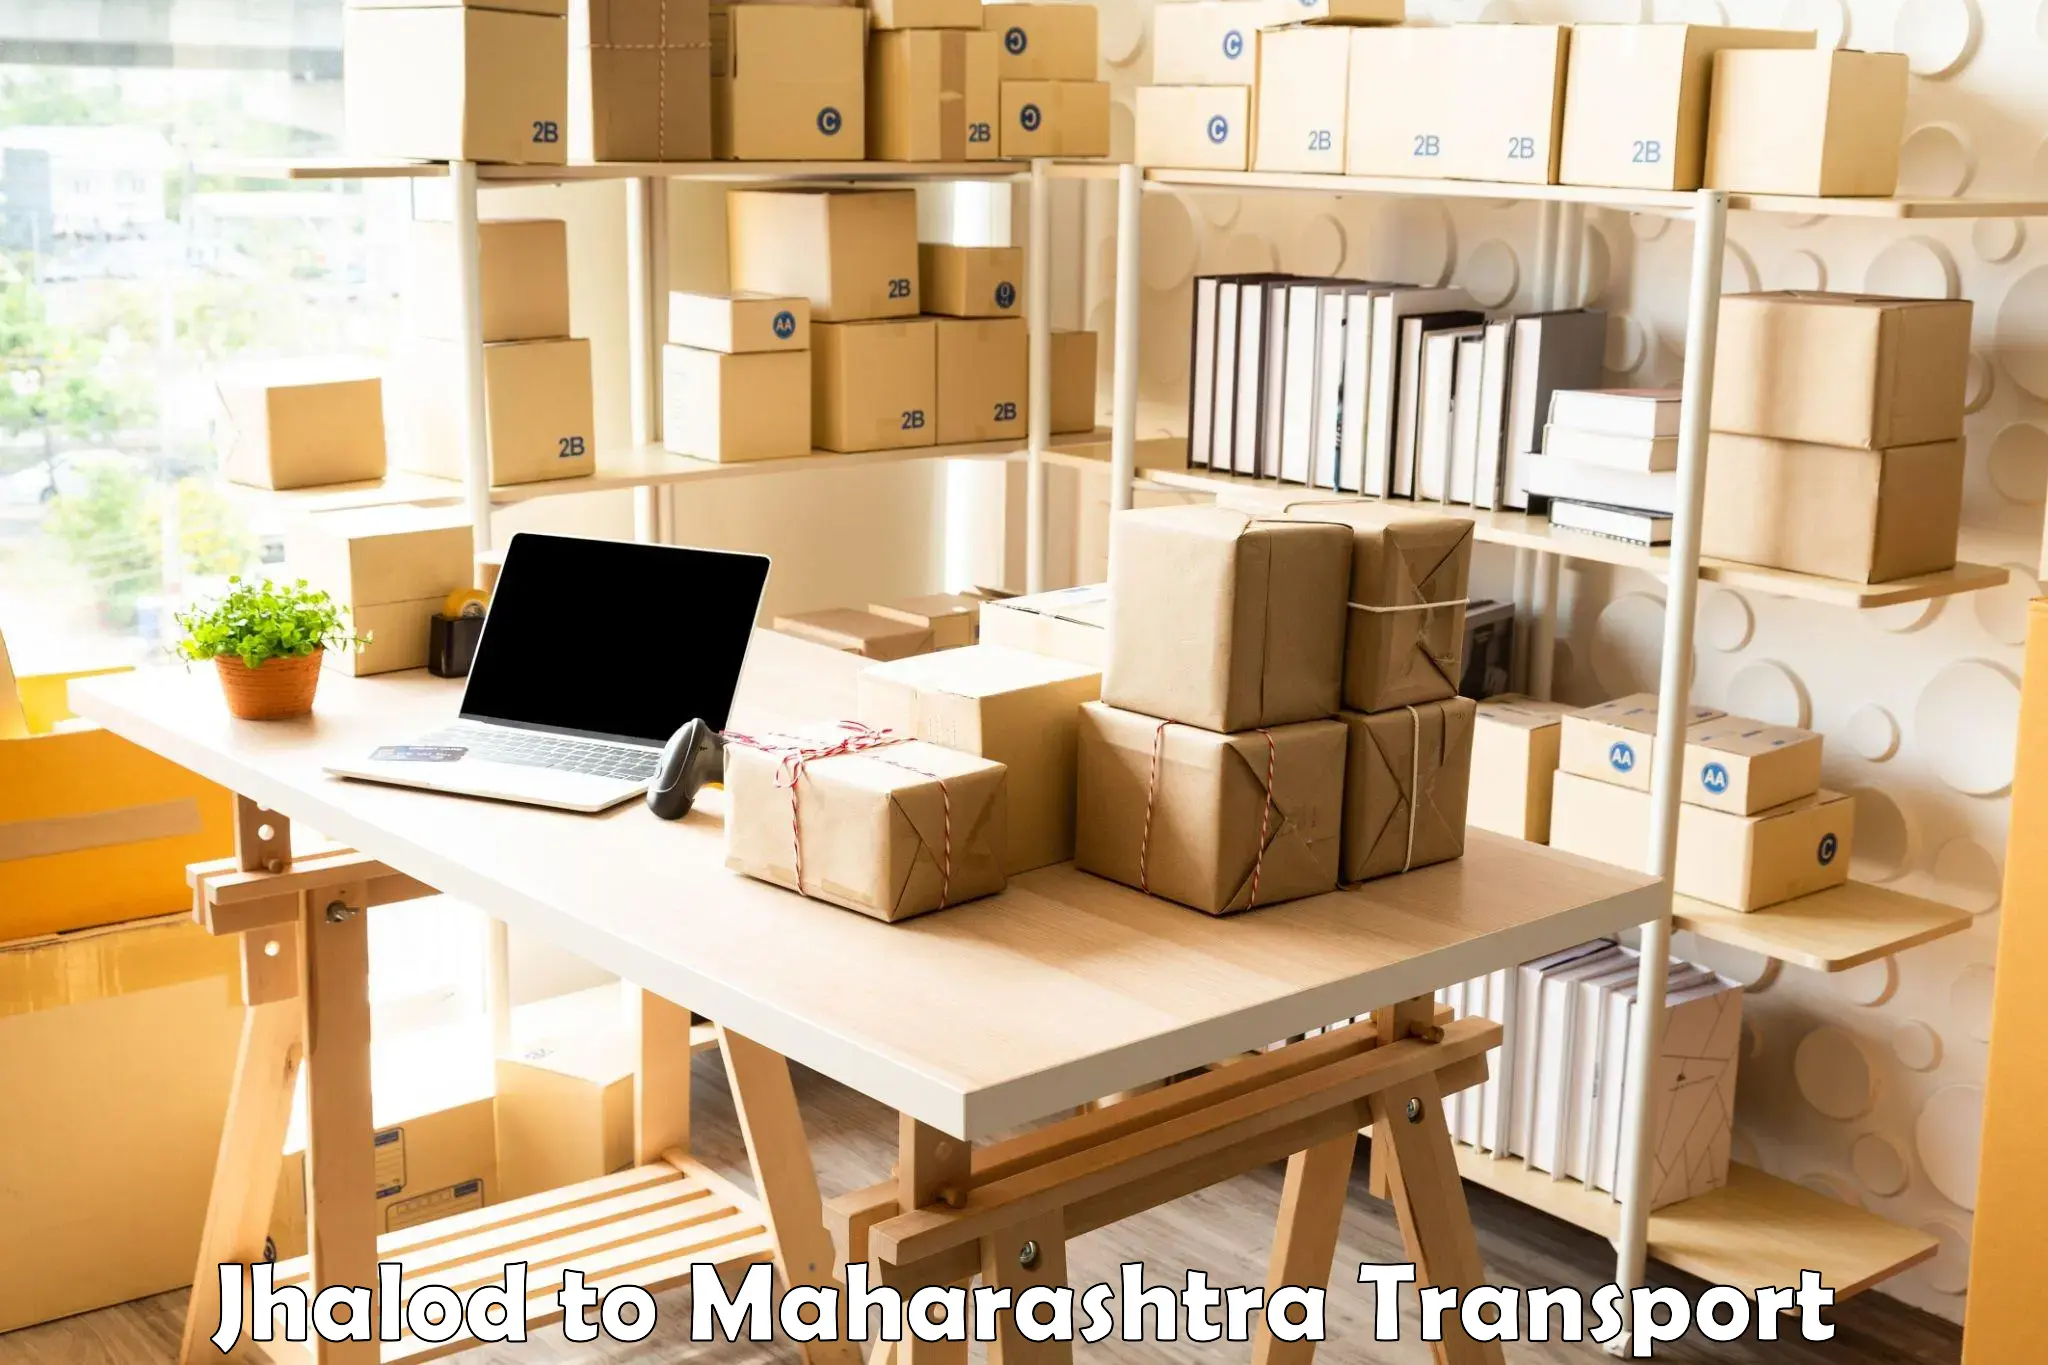 Container transport service in Jhalod to Rahimatpur